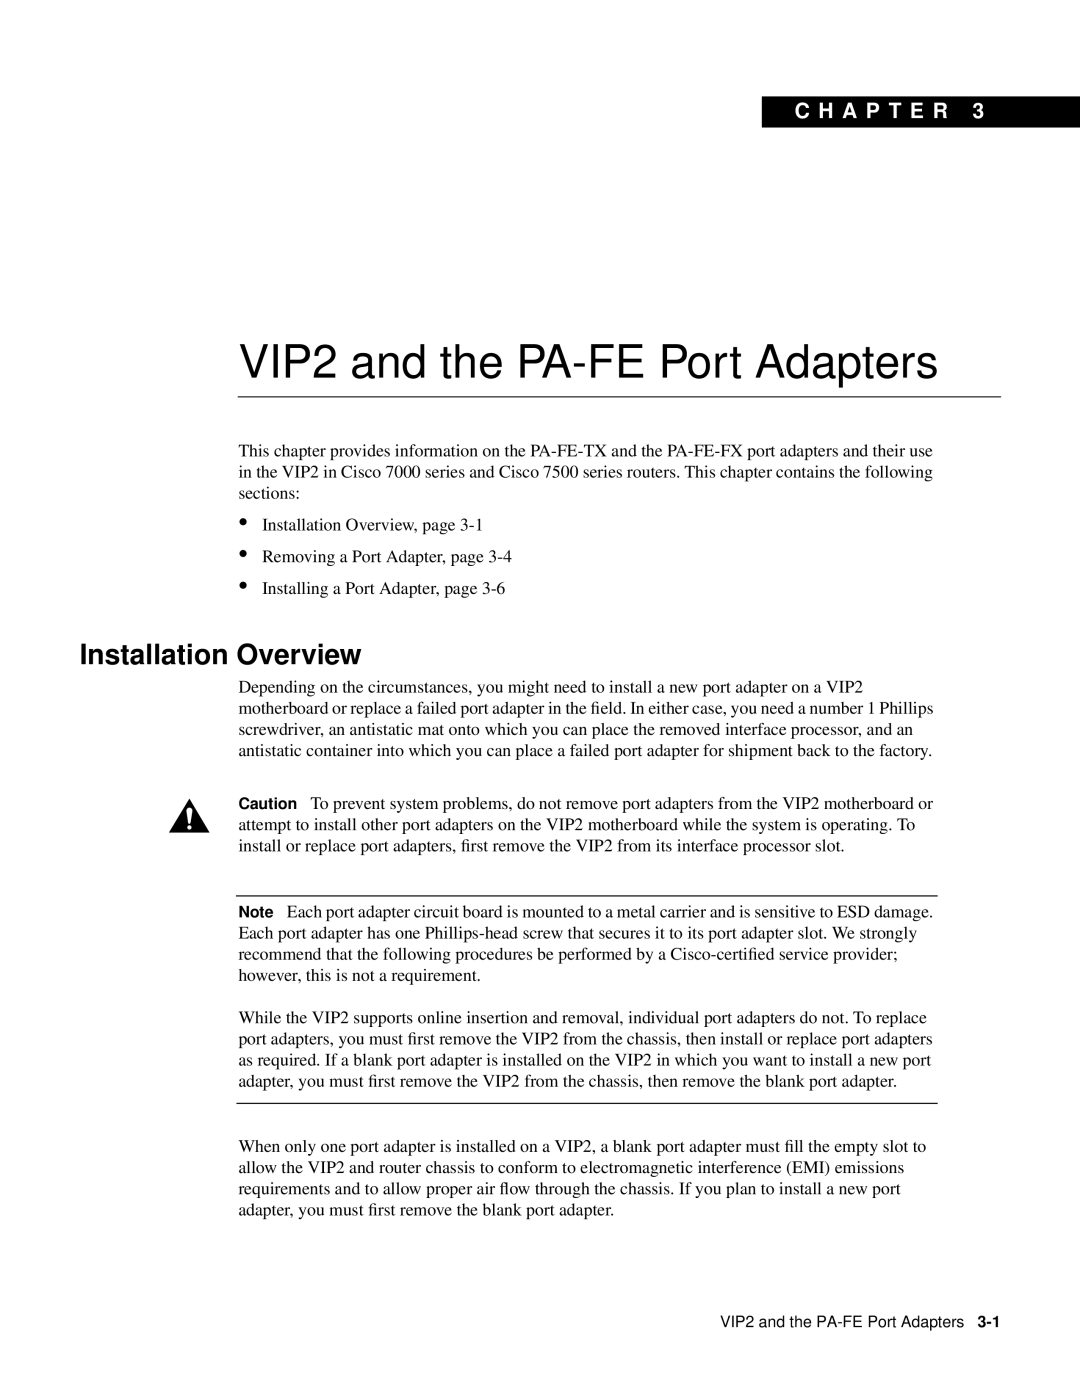 Cisco Systems PA-FE-FX, PA-FE-TX manual VIP2 and the PA-FE Port Adapters, Installation Overview, C H A P T E R 